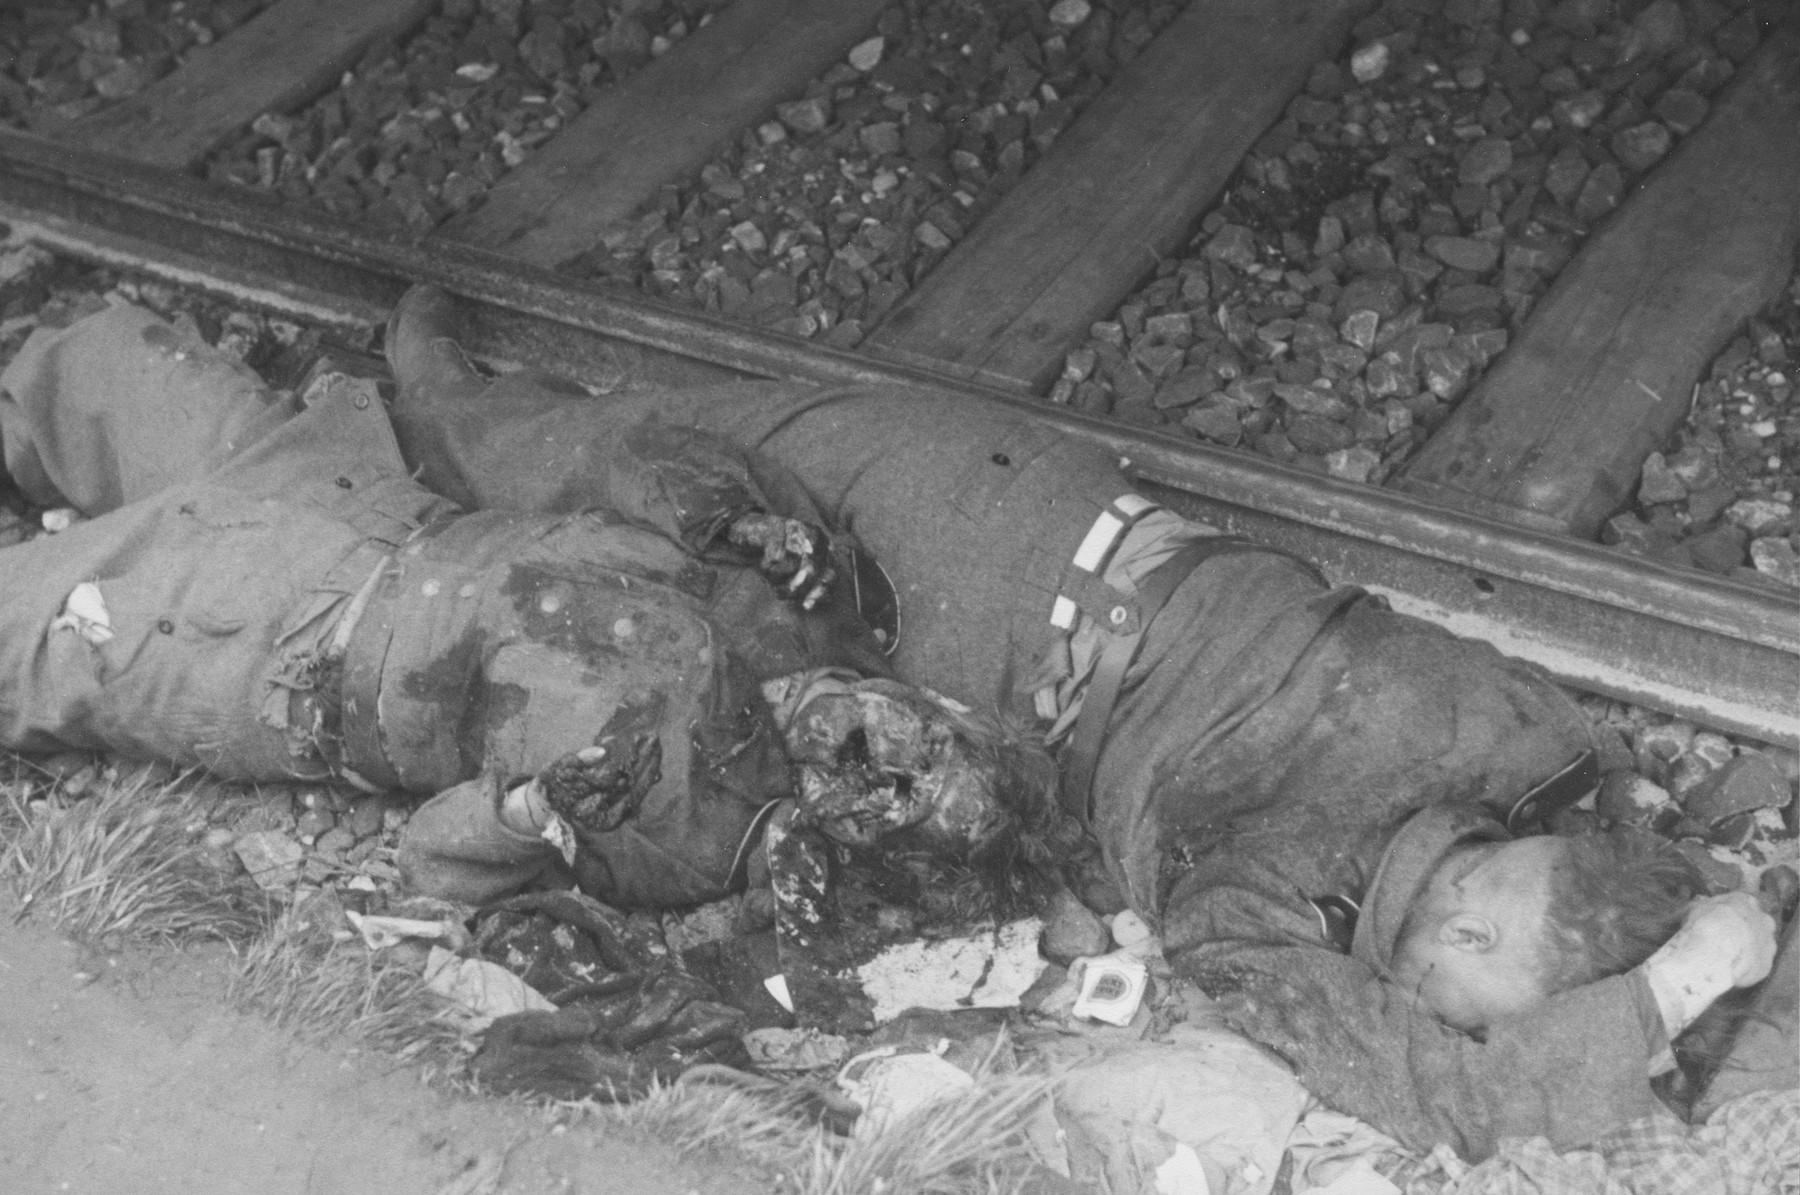 Camp guards, killed in revenge killings, lie next to the railroad tracks in the Dachau concentration camp.